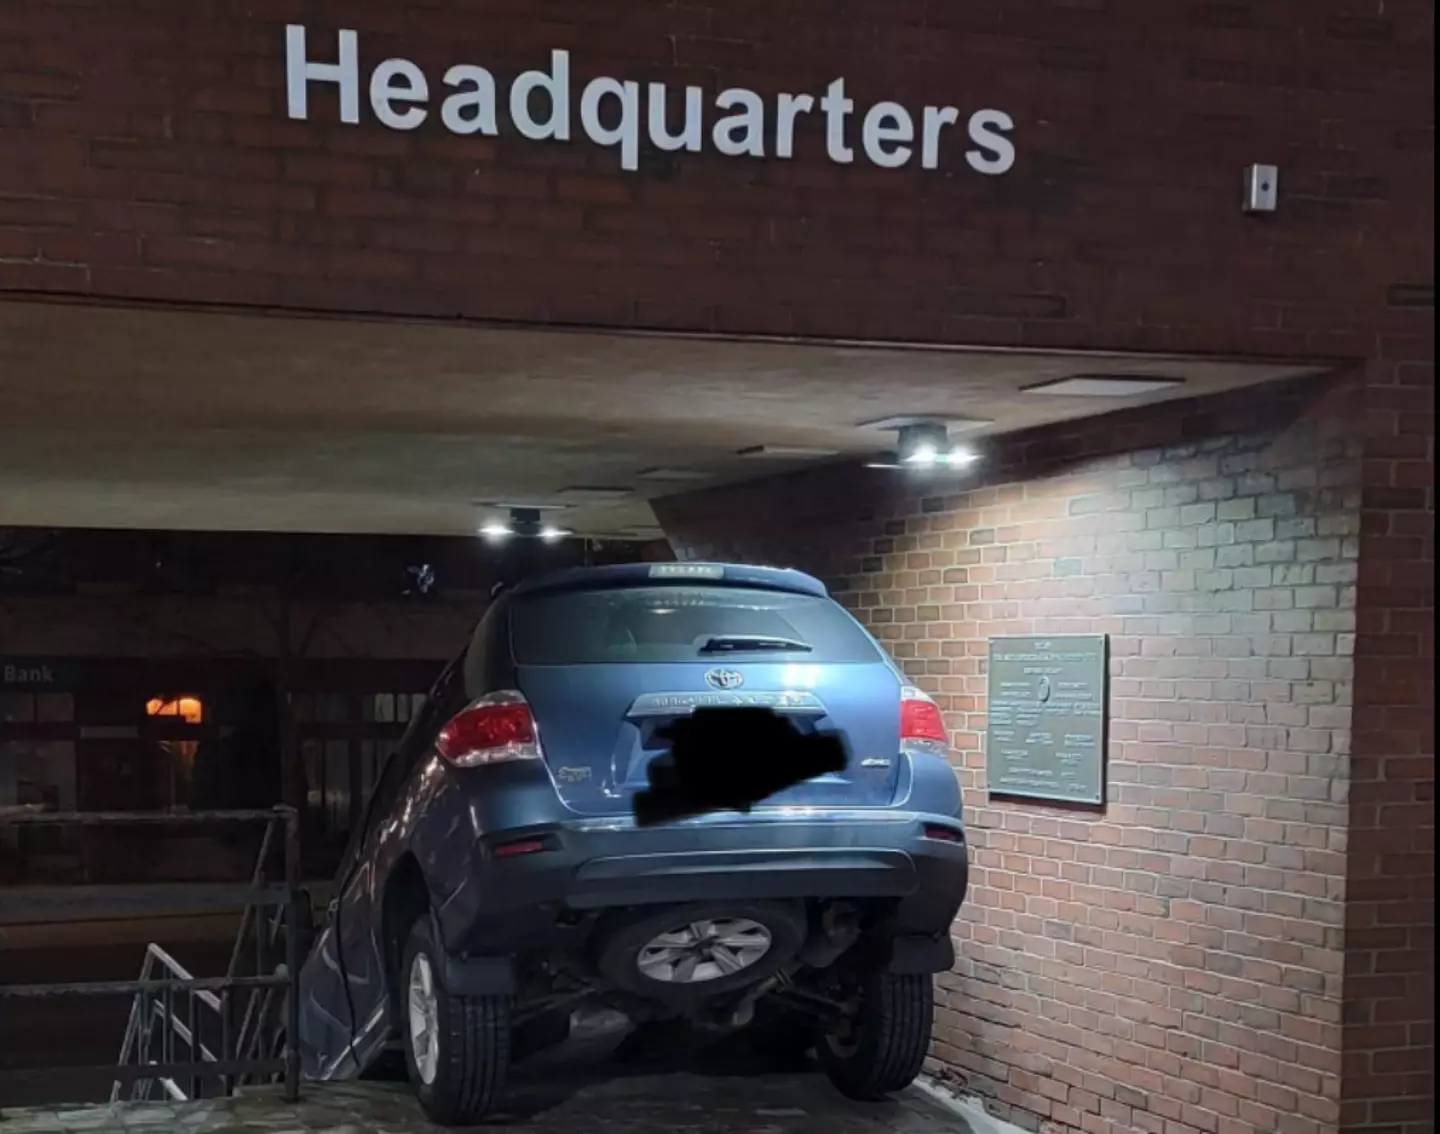 A 26-year-old woman crashed her car into a police department garage area.